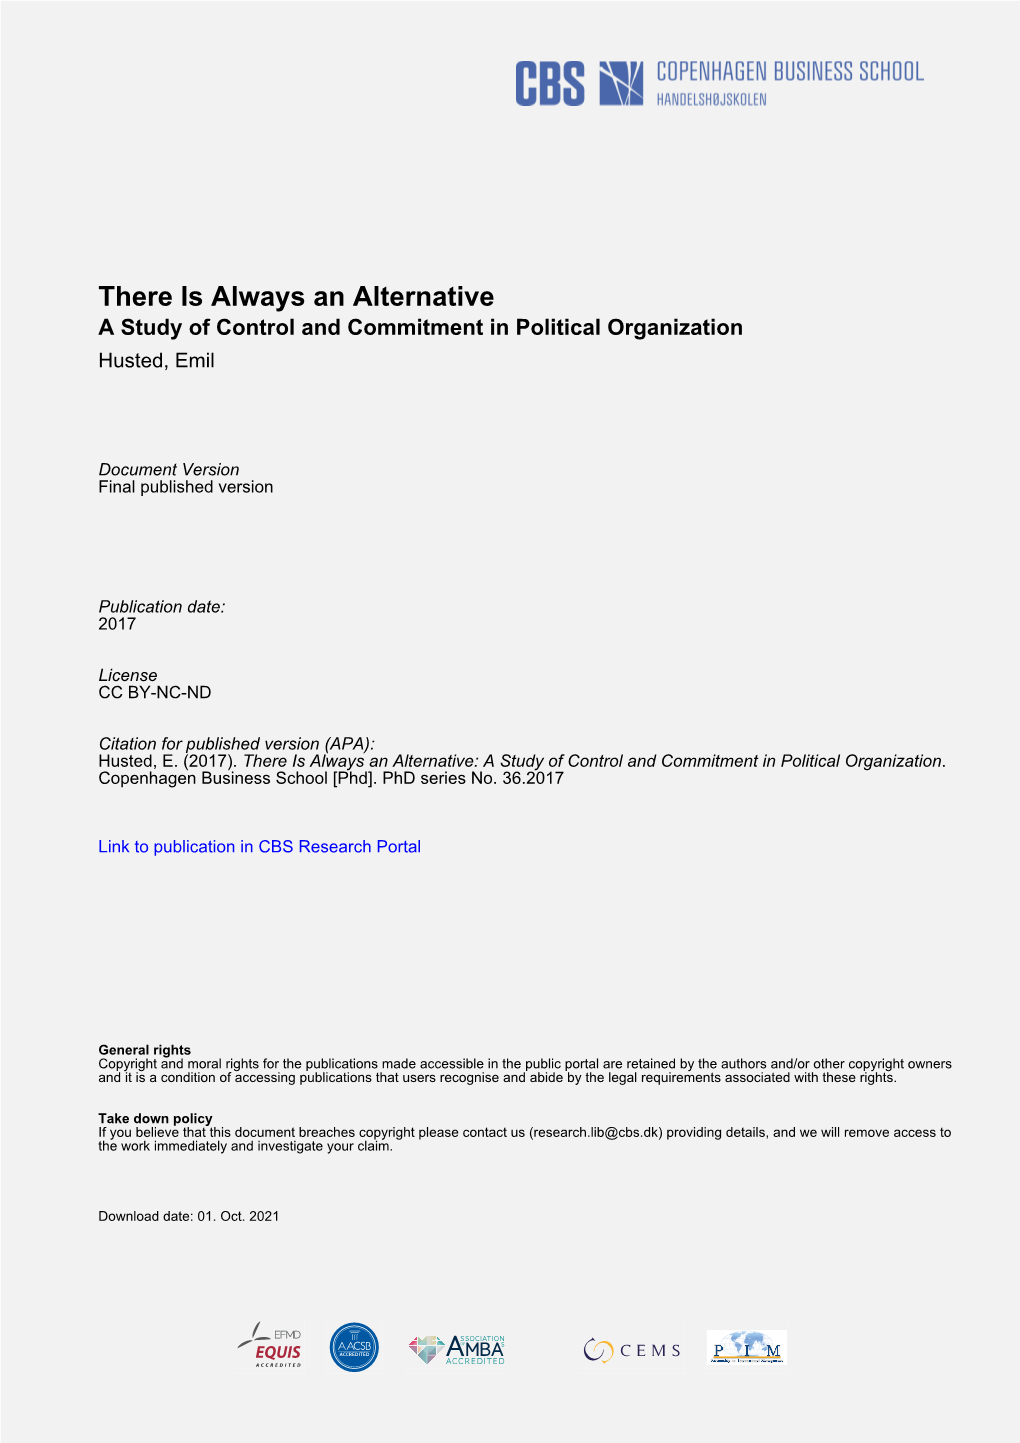 Emil Husted THERE IS ALWAYS an ALTERNATIVE: a STUDY of CONTROL and COMMITMENT in POLITICAL ORGANIZATION